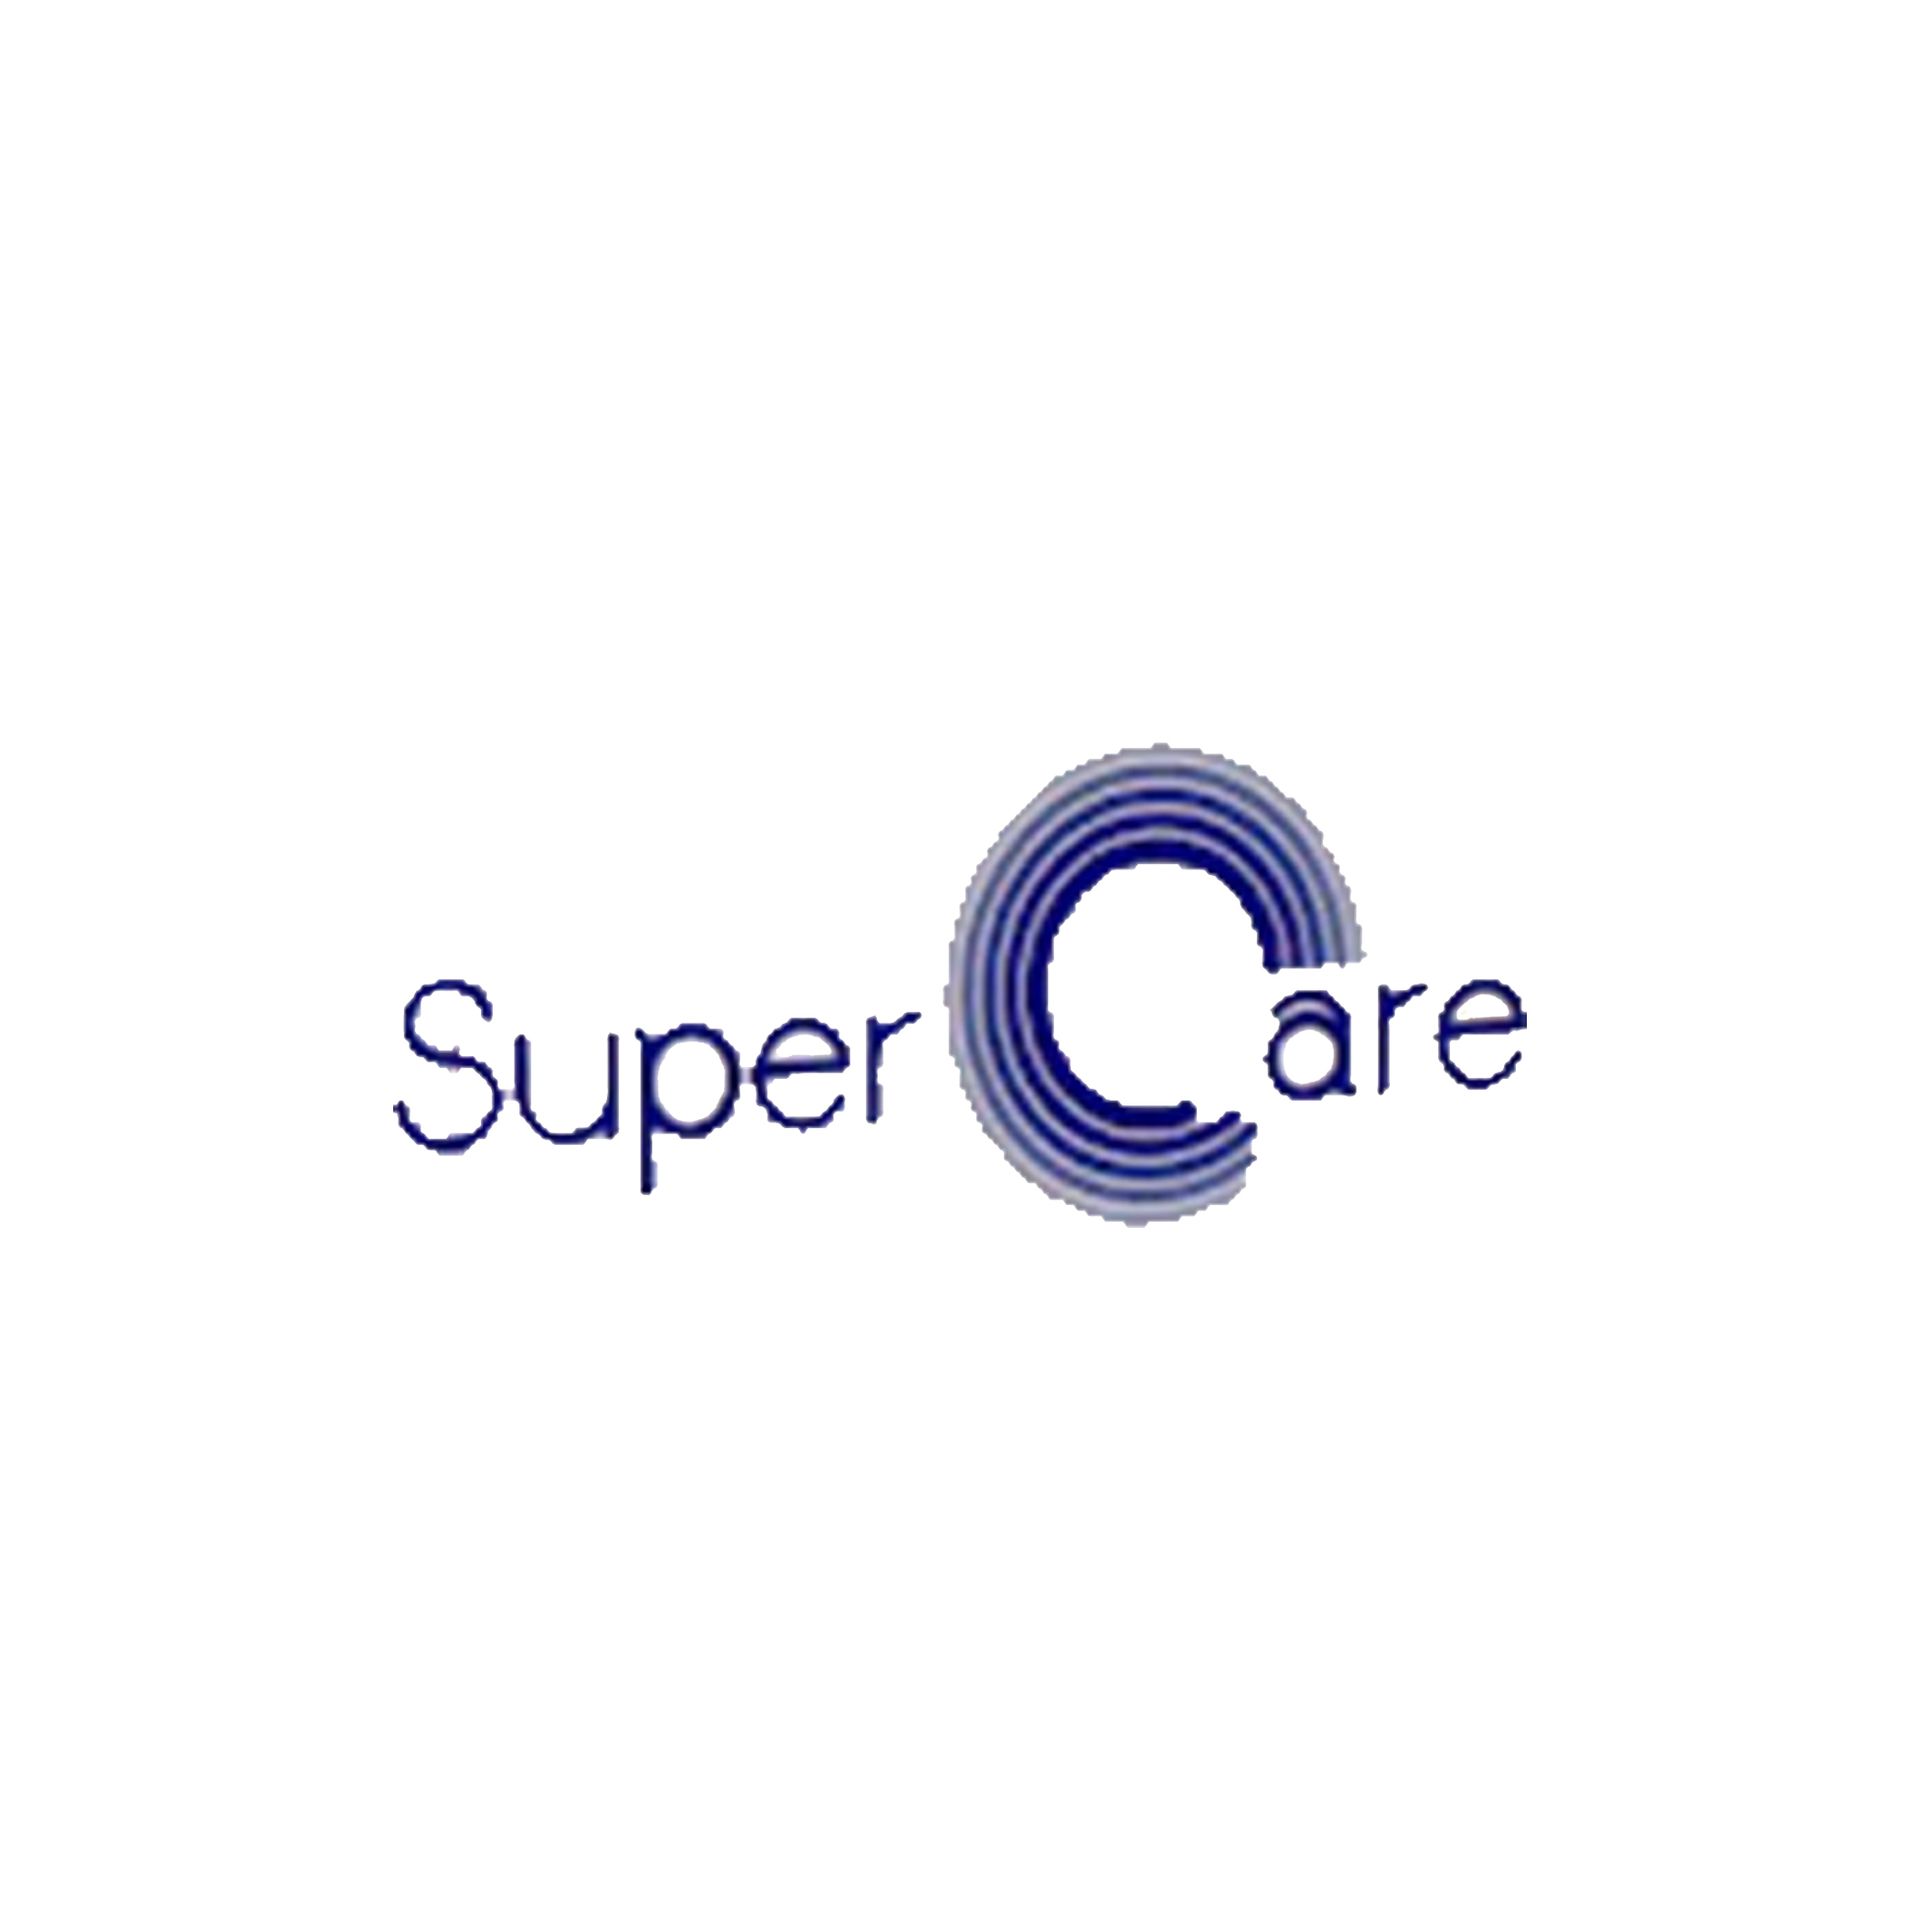 Product Brand: Supercare